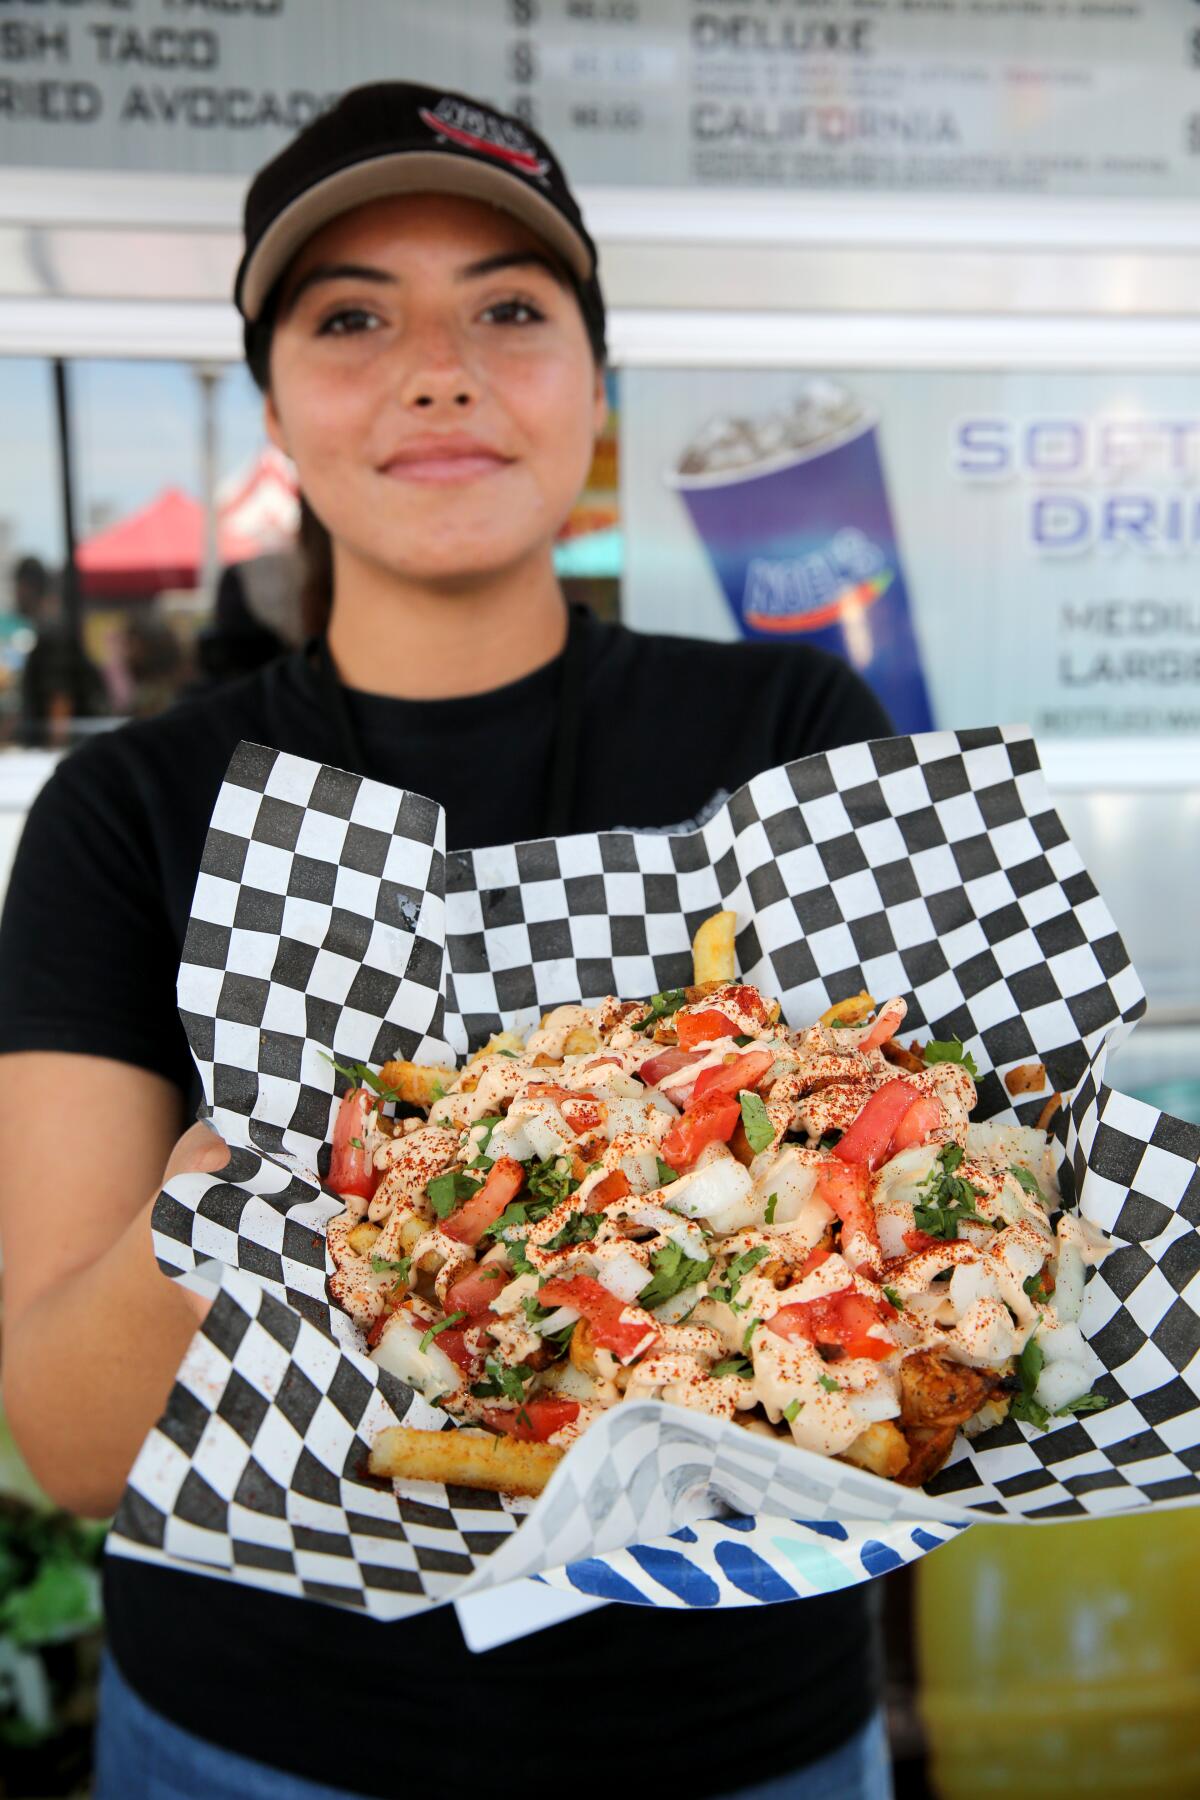 Yaqui from Noel's Mexican Food shows the chicken chipotle fries.